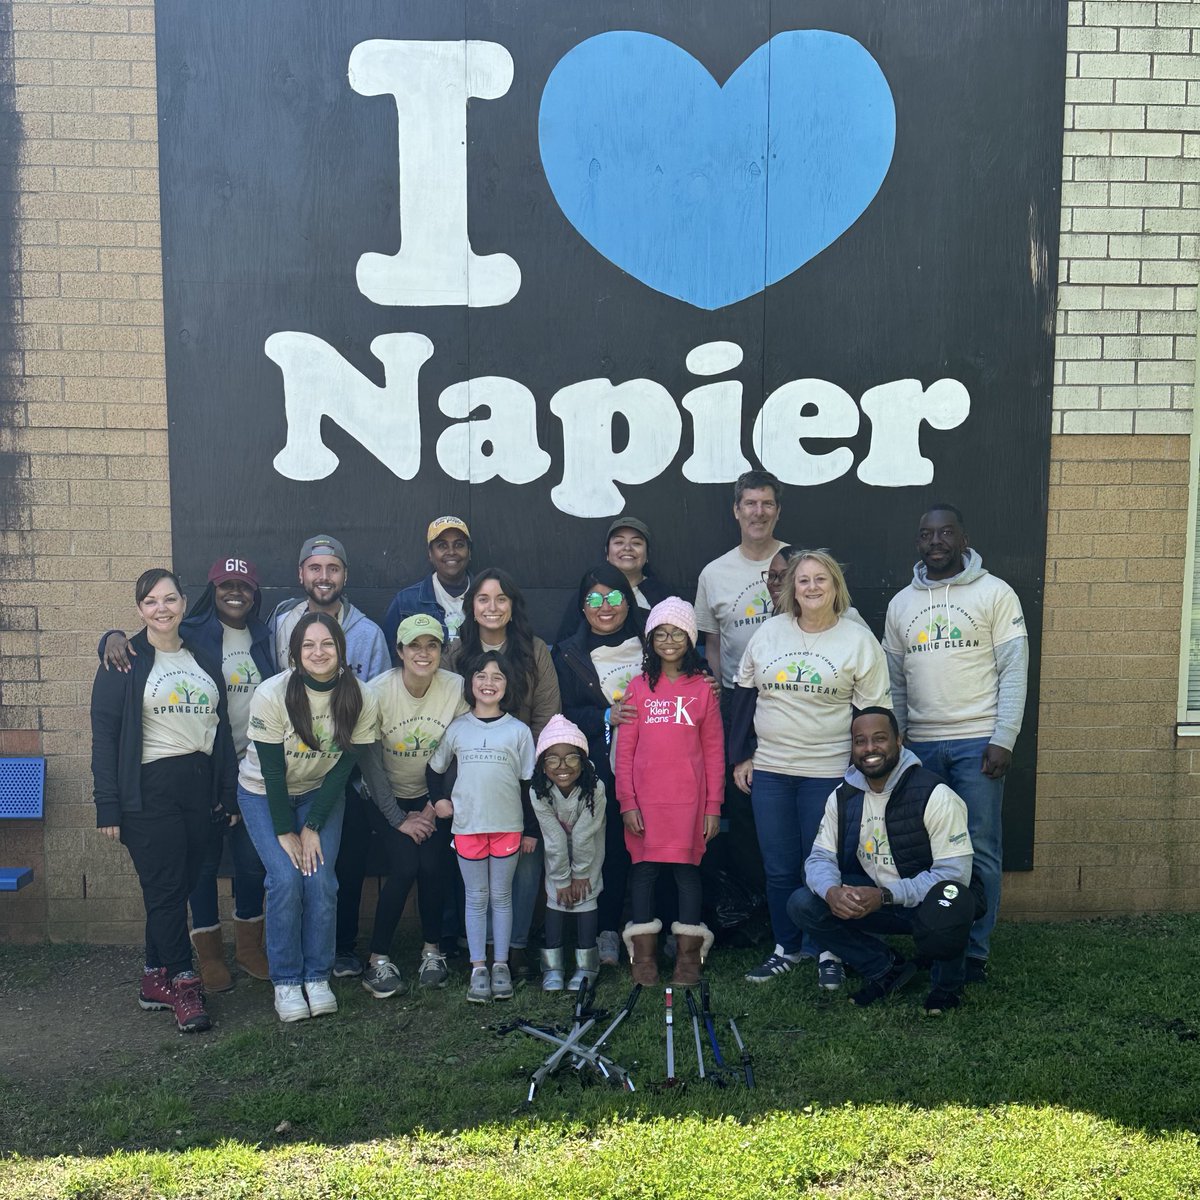 It was a beautiful day for the Mayor’s Spring Clean event! 🌸☀️ We are so grateful to Mayor @freddieoconnell, the Mayor’s Office staff, Metro Council Members, Beautification Commissioners, & all of the volunteers that participated in a cleanup across Nashville & Davidson County!